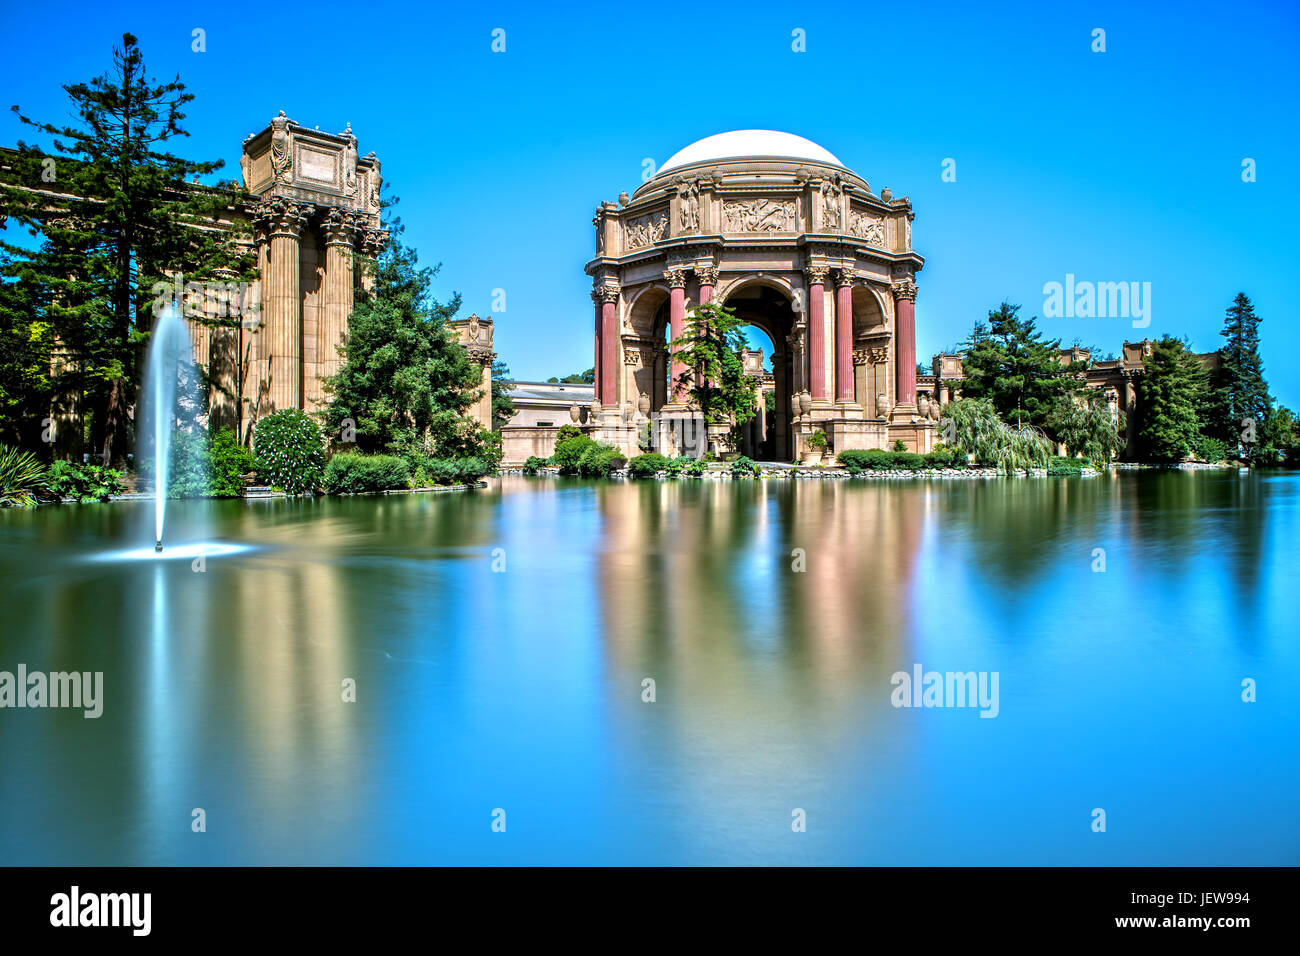 Palace of Fine Arts in San Francisco als Langzeitbelichtung Stockfoto